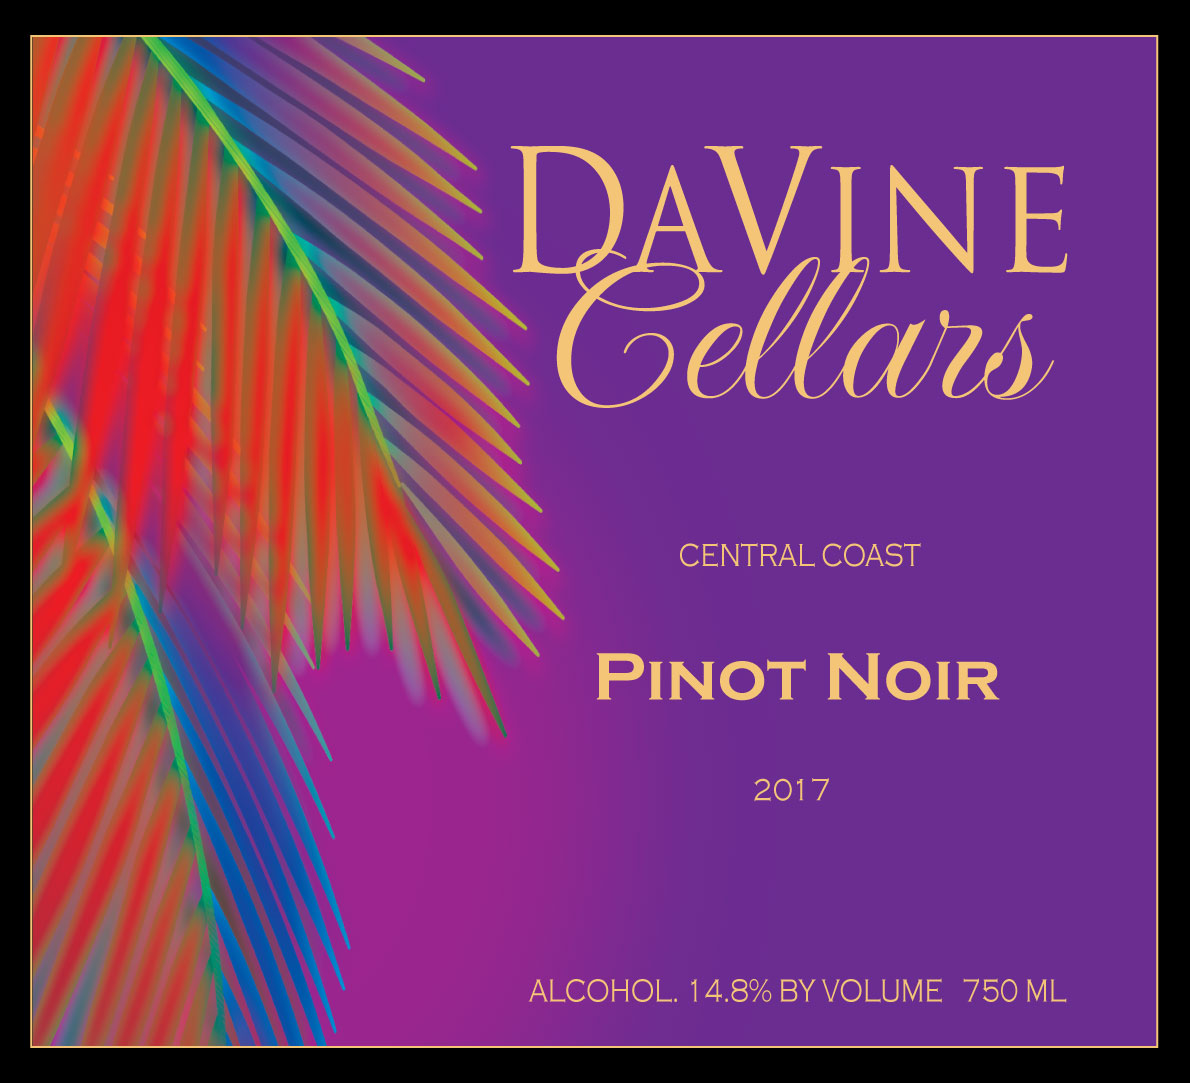 Product Image for 2017 Central Coast Pinot Noir "Fascination"